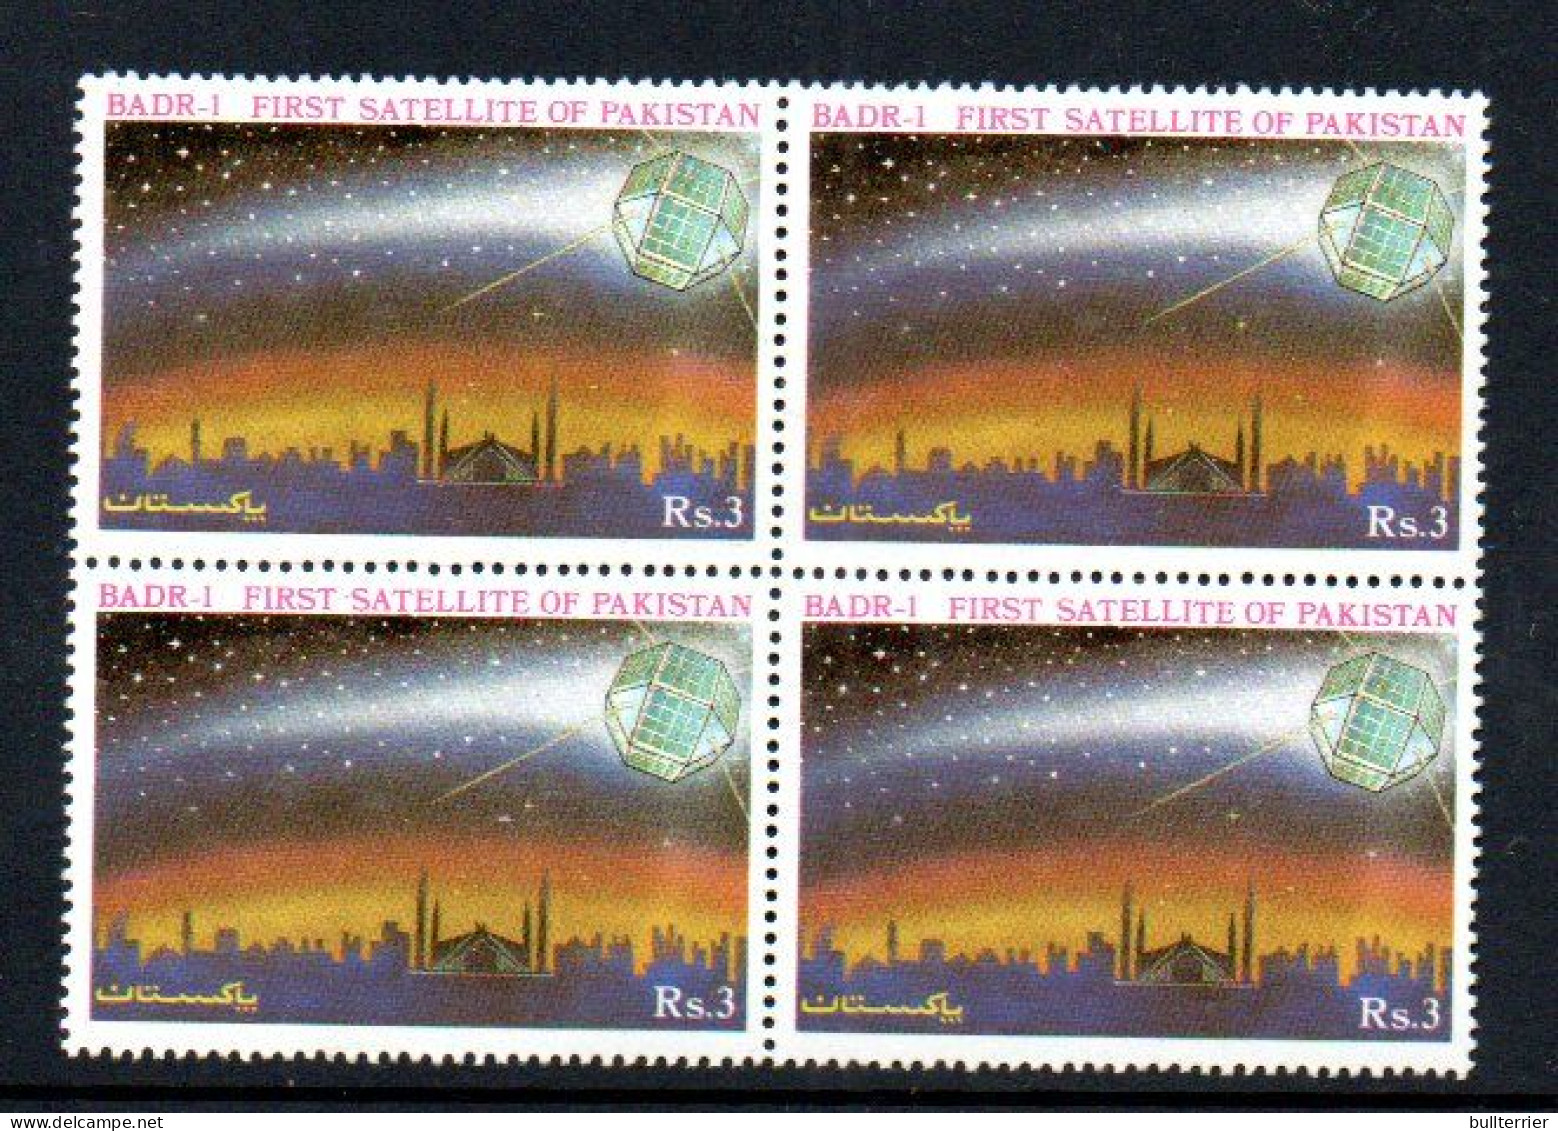 SPACE - PAKISTAN - 1990 - LAUNCHING OF BADR 1 FIRST SATELLITTEE BLOCK OF 4  MINT NEVER HINGED, SG CAT £14 - Asie